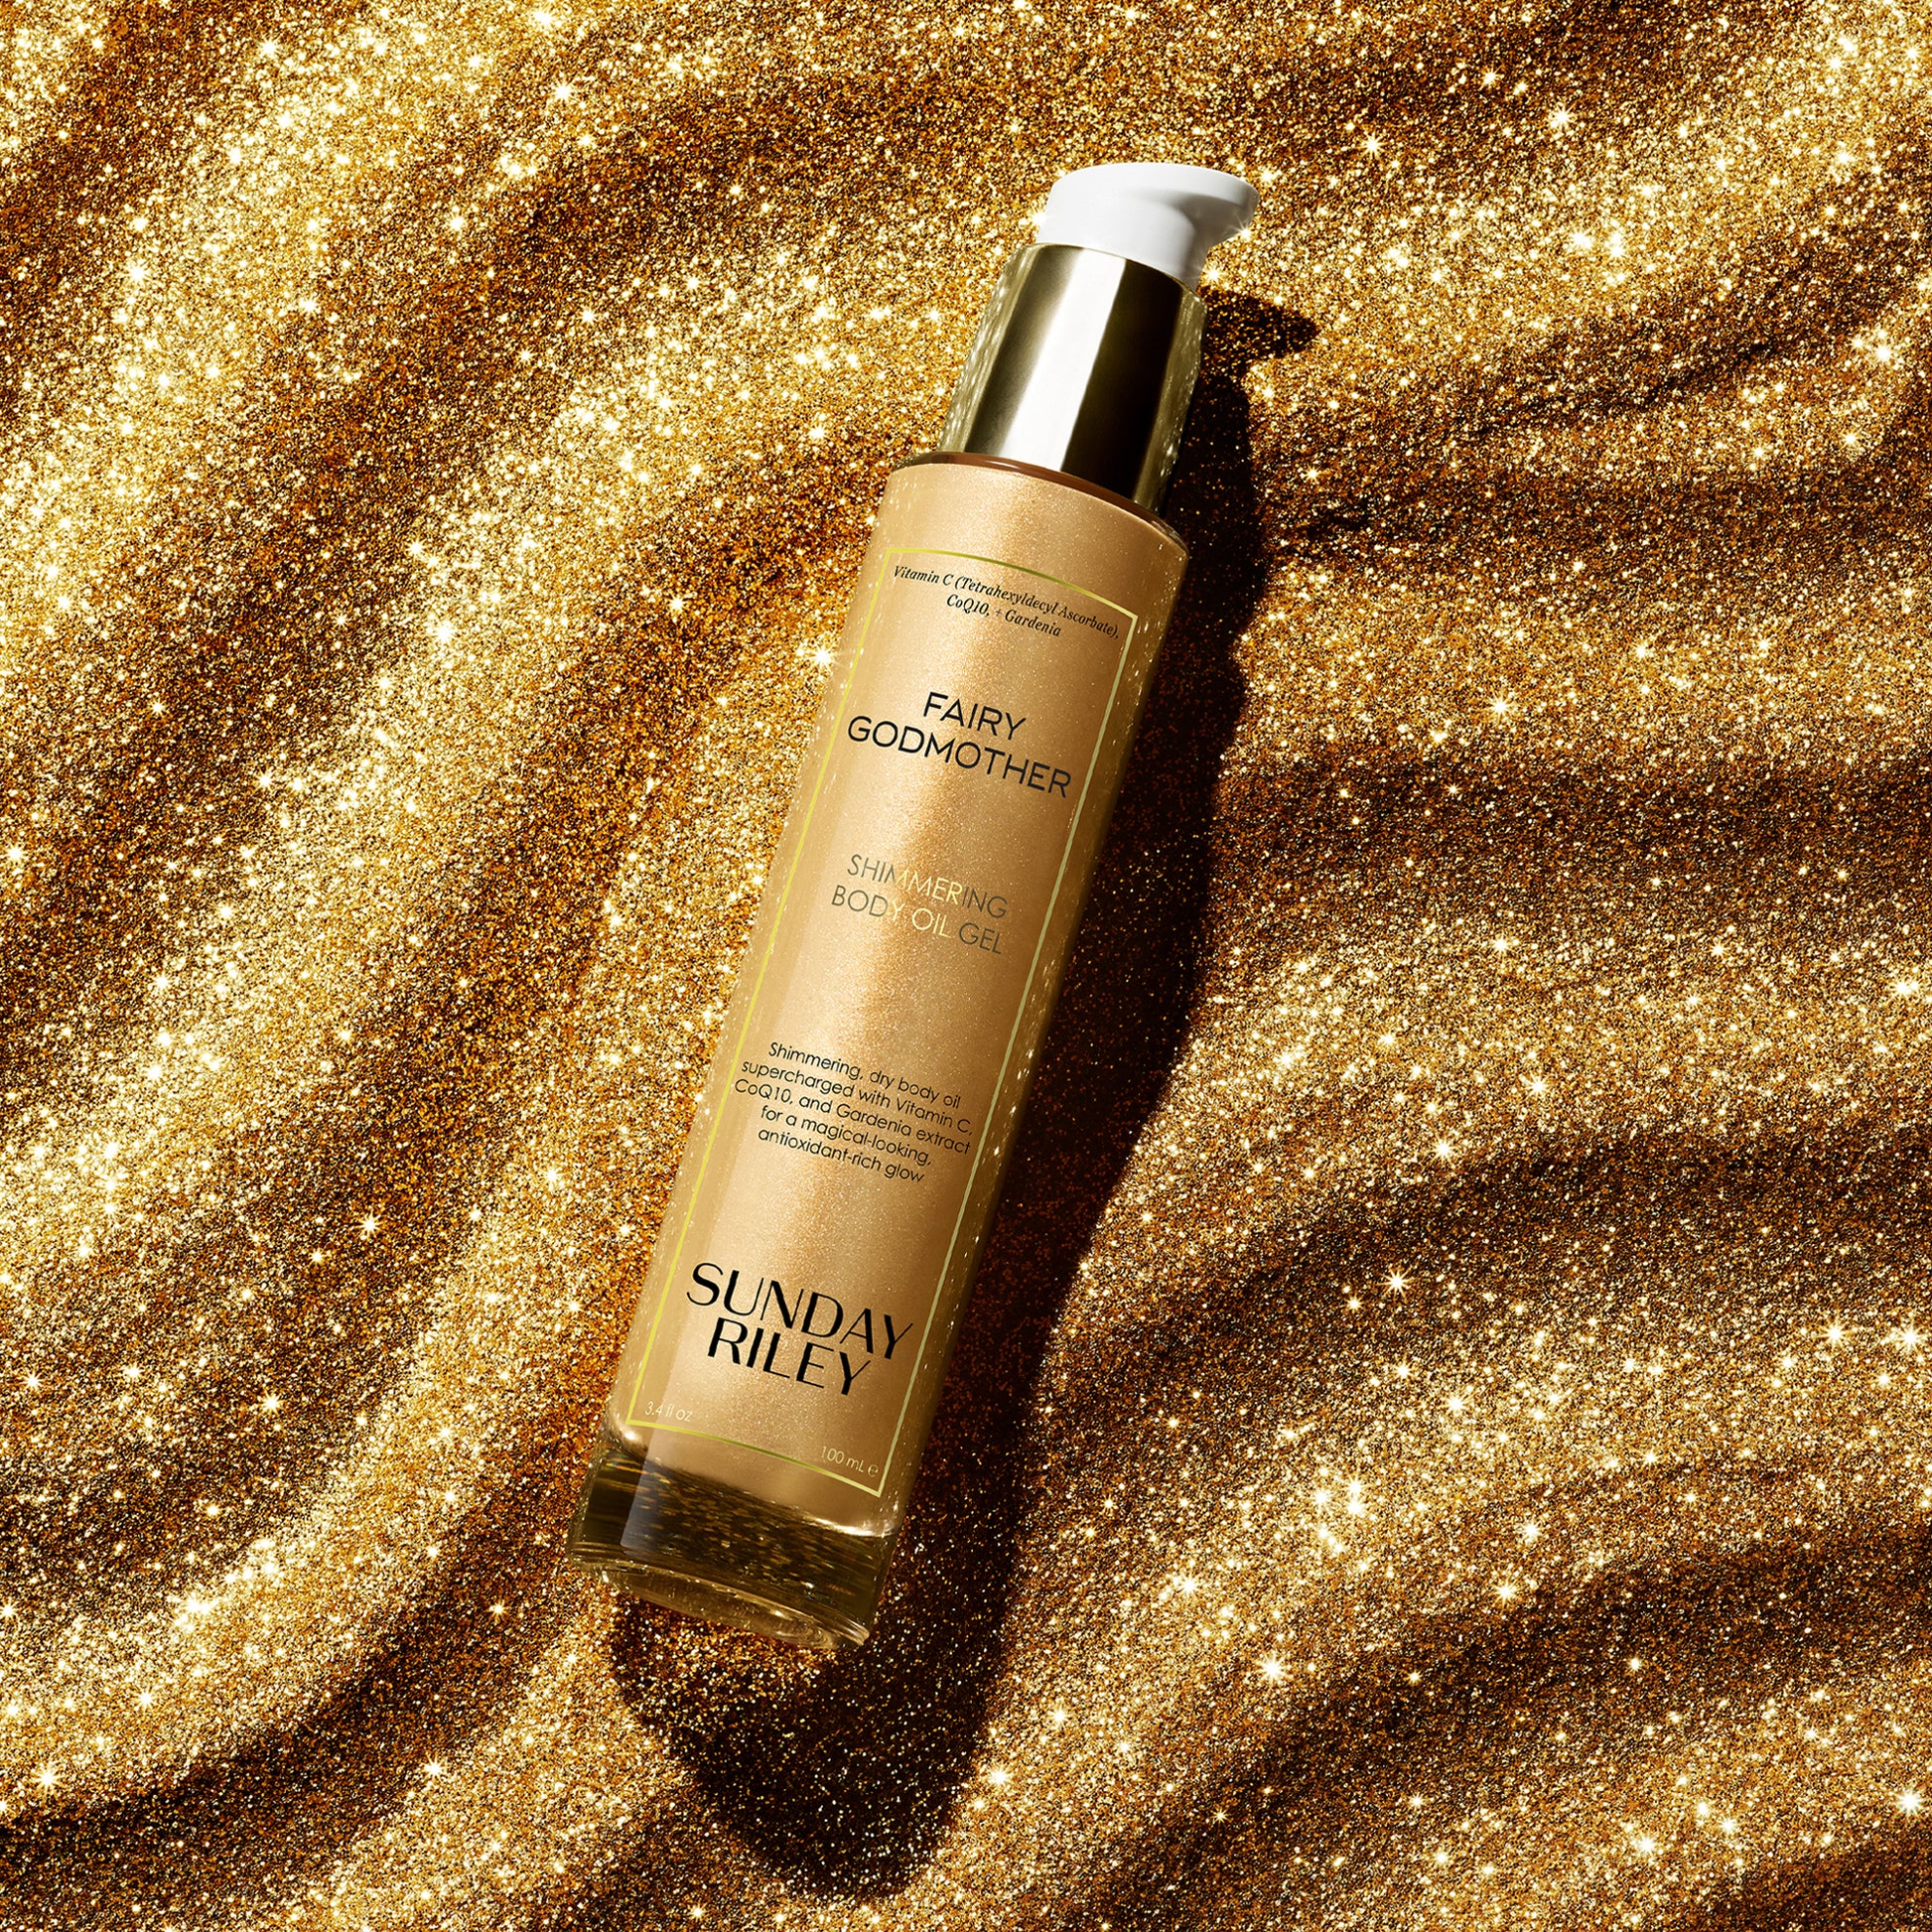 Fairy Godmother bottle lay over shiny gold texture powder